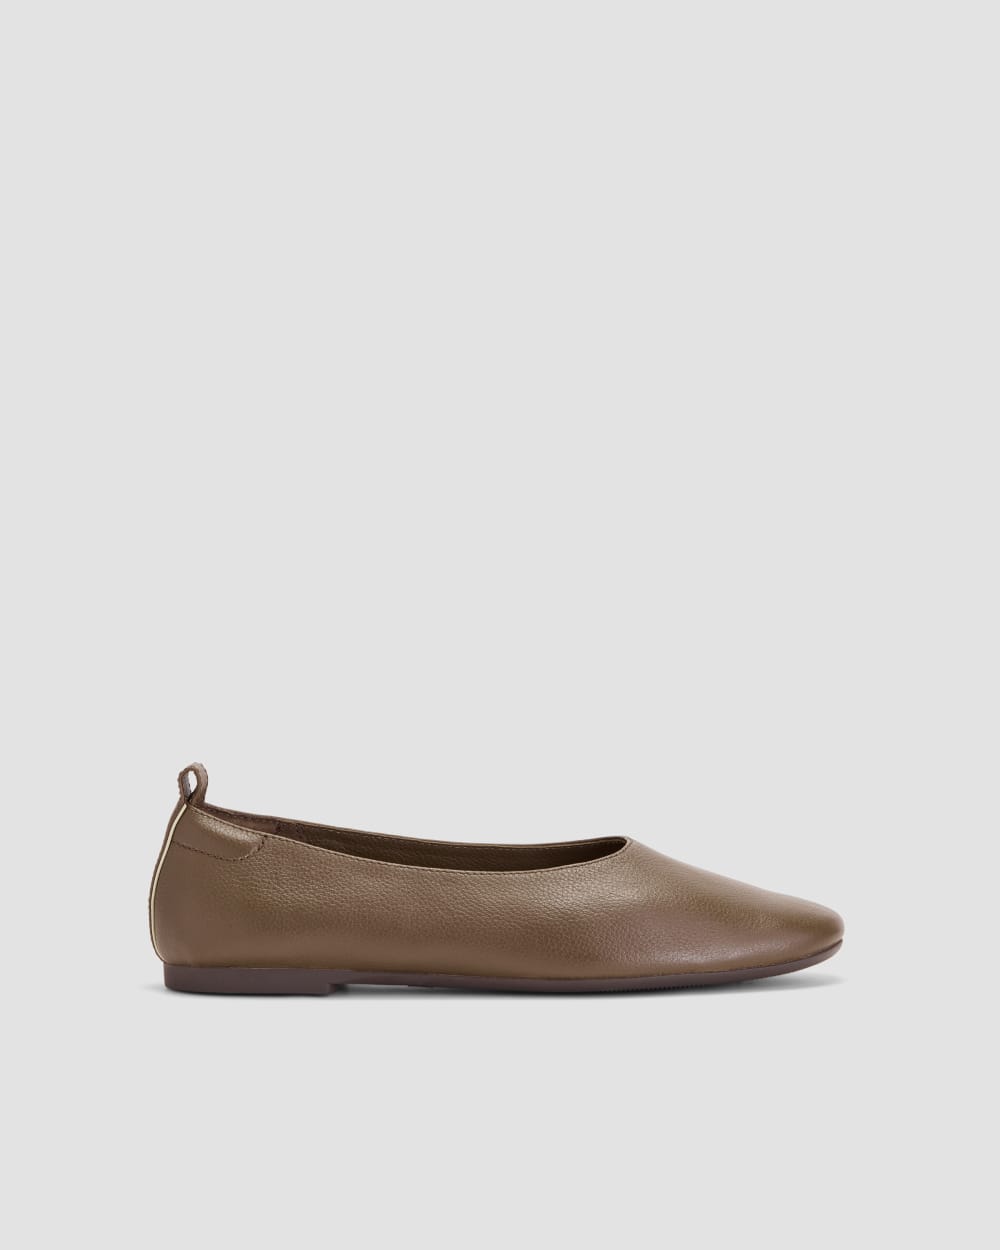 The Day Ballet Flat Toasted Almond – Everlane